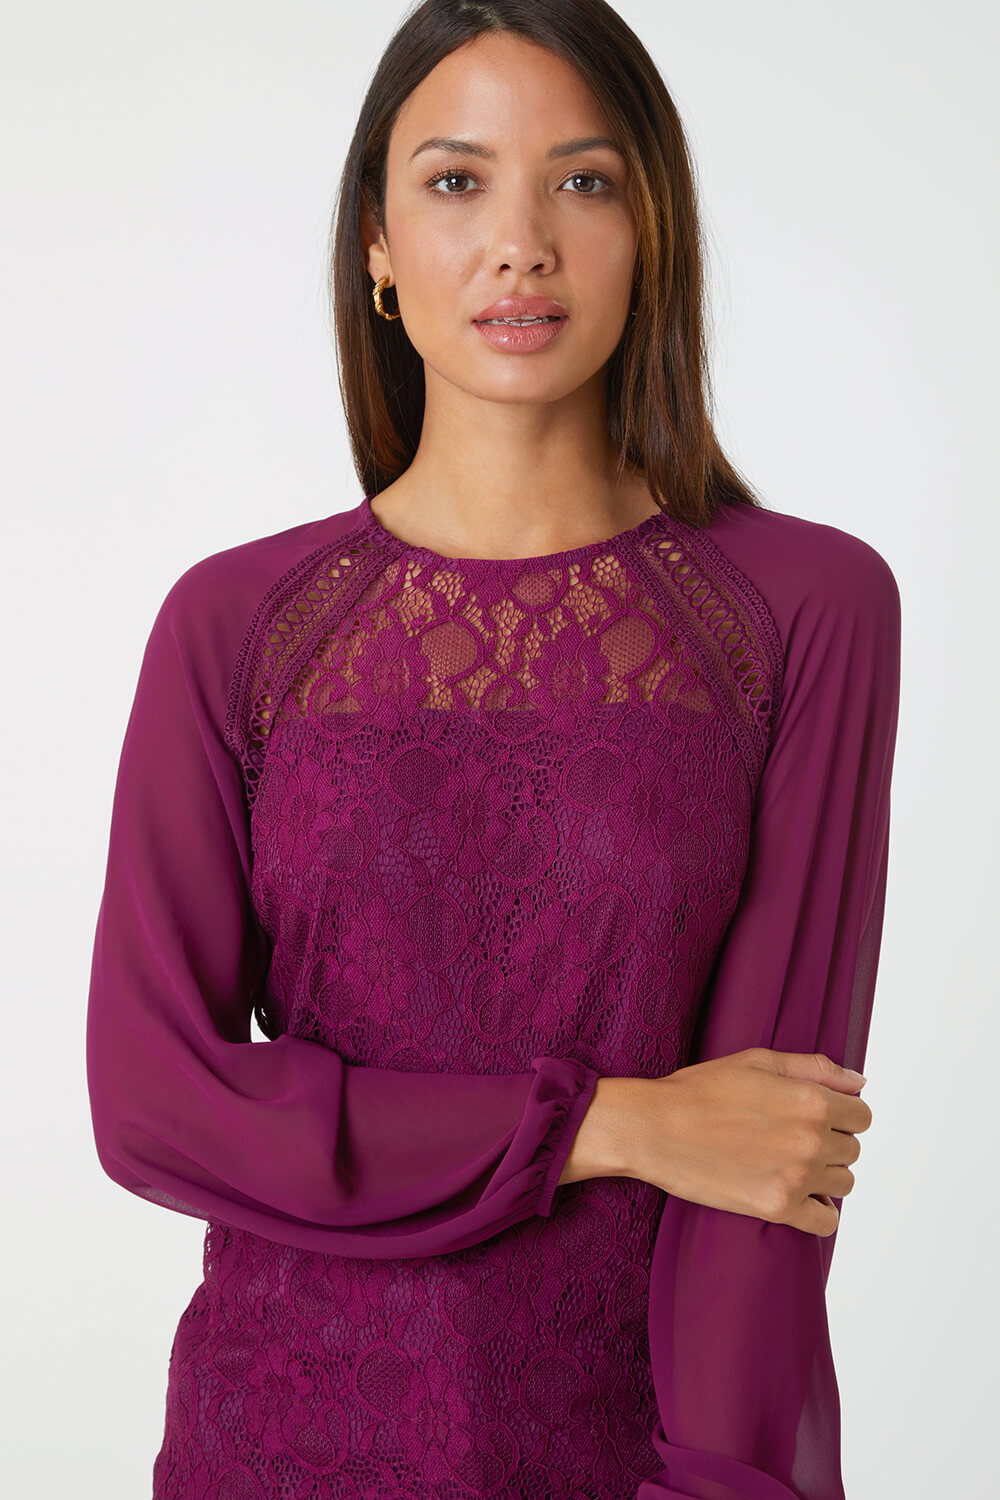 Purple Lace Detail Chiffon Sleeve Stretch Top, Image 4 of 5